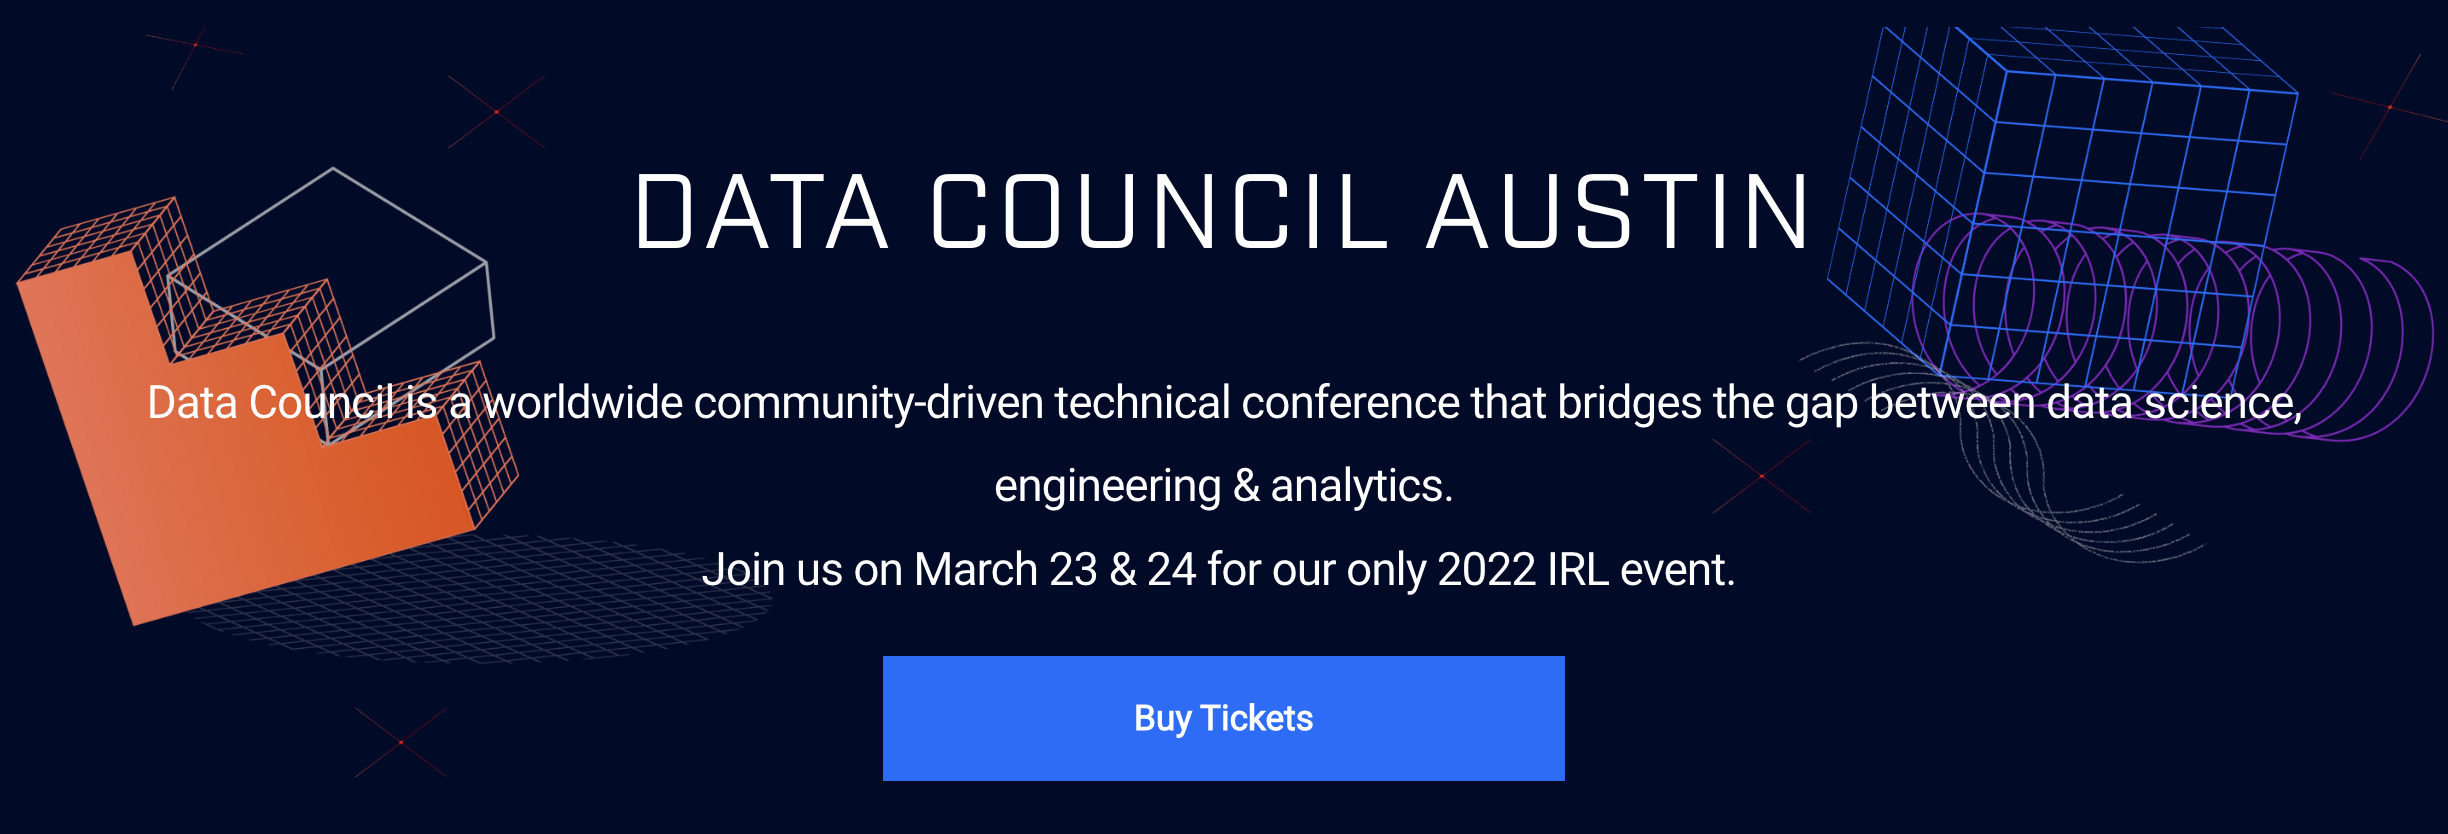 Census @ Data Council Austin: High-Quality Data, Self-Served